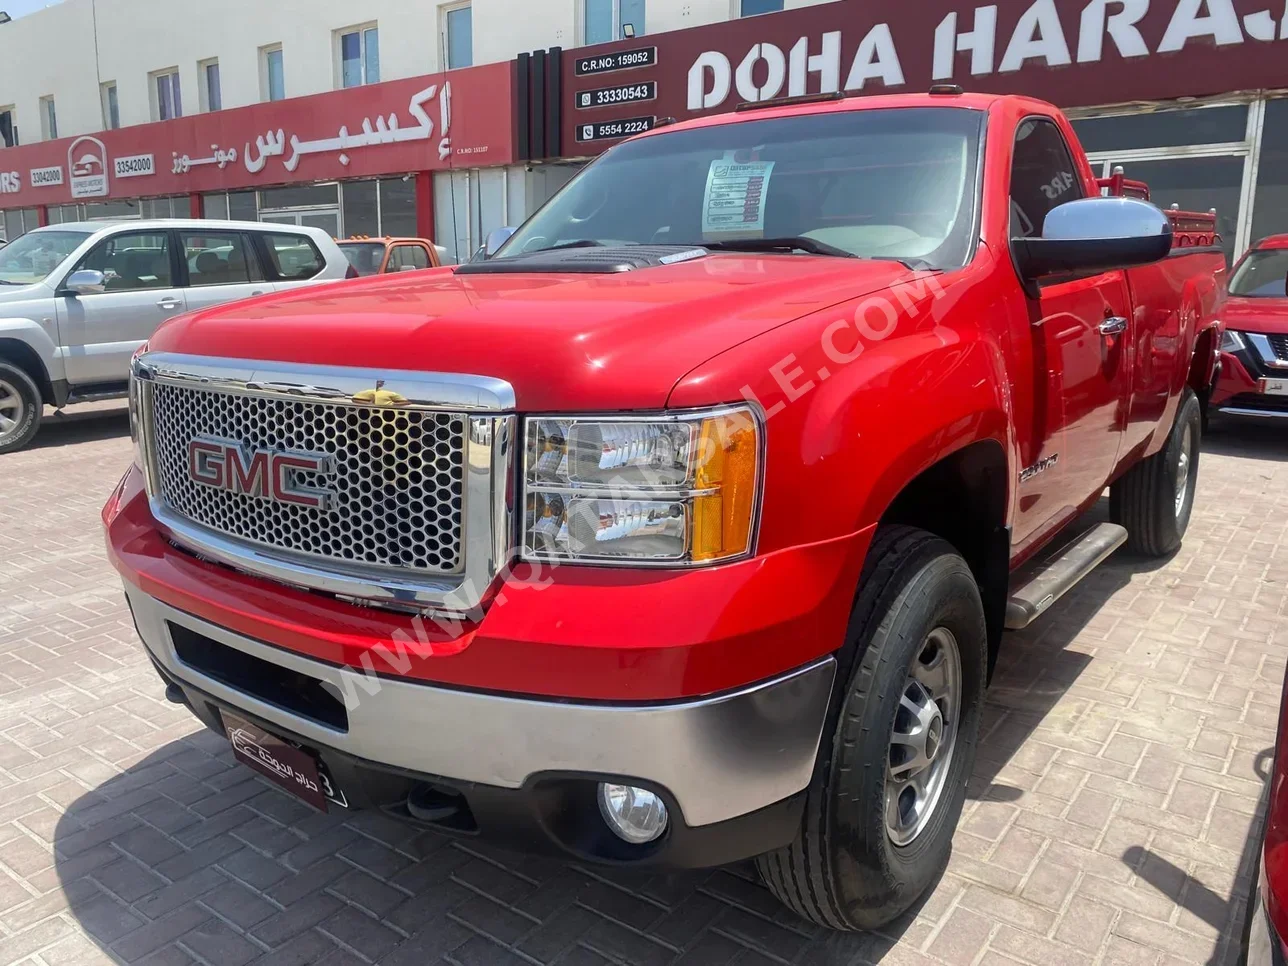 GMC  Sierra  2500 HD  2014  Automatic  261,000 Km  8 Cylinder  Four Wheel Drive (4WD)  Pick Up  Red